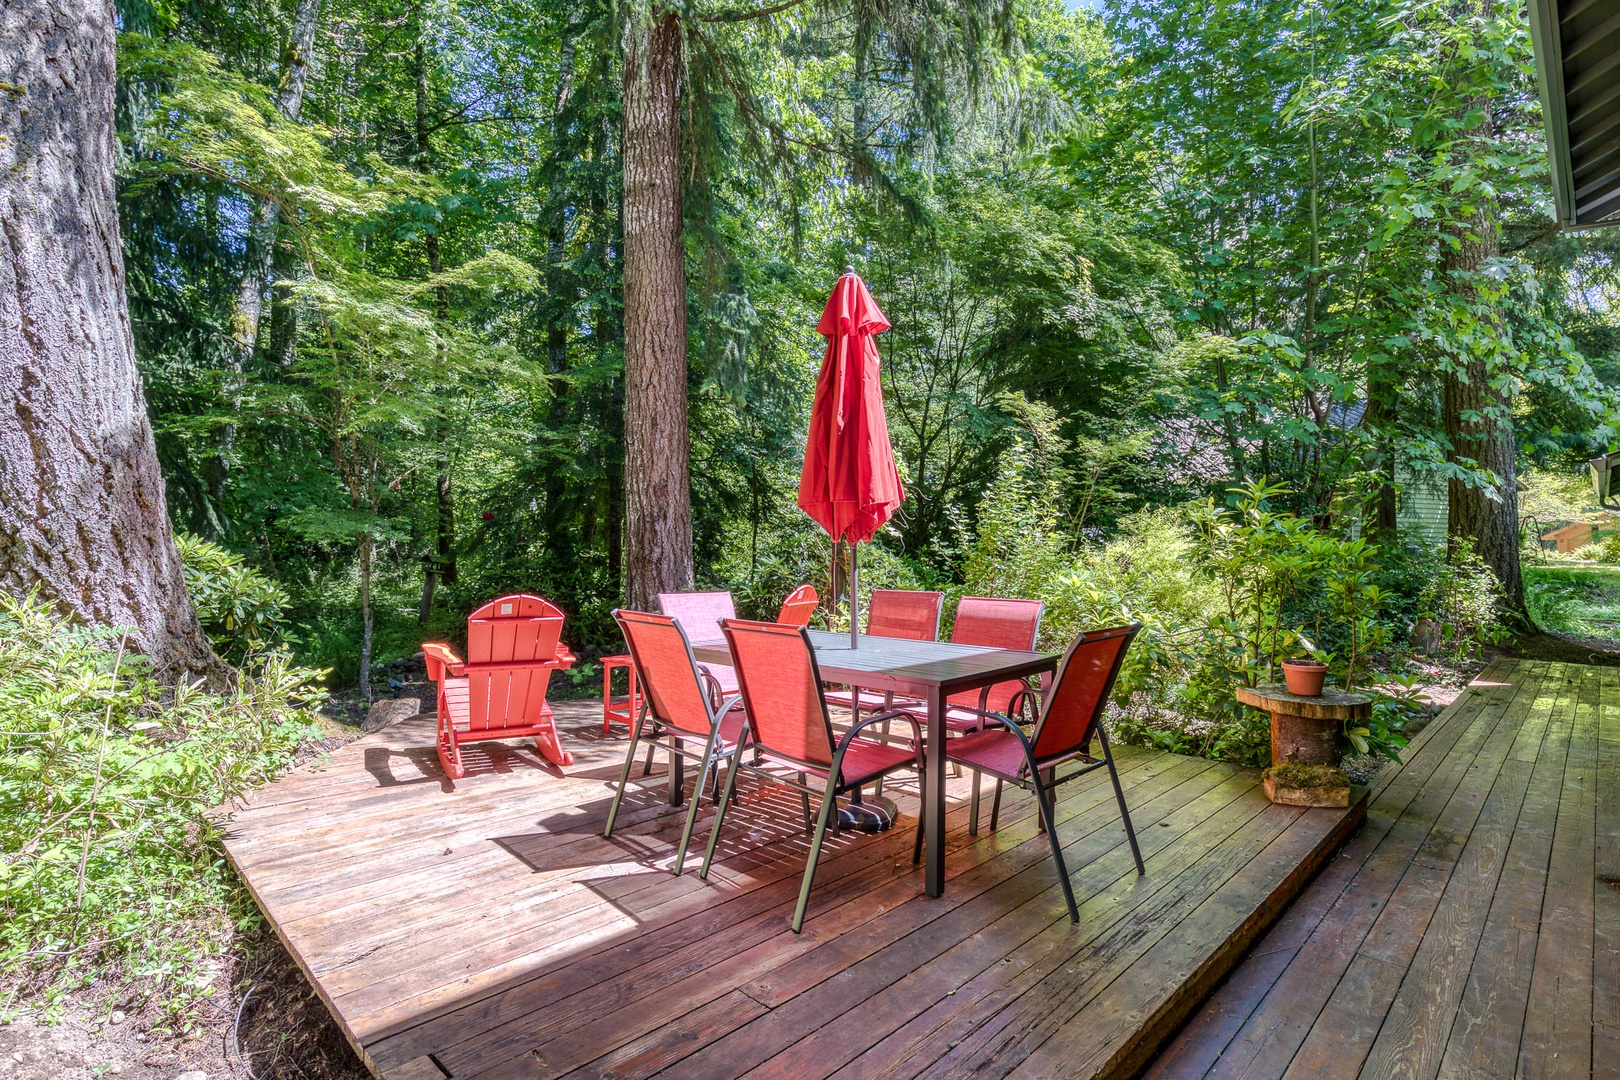 Welches Vacation Rentals, Bright and Cozy - Vitamin D on the patio!